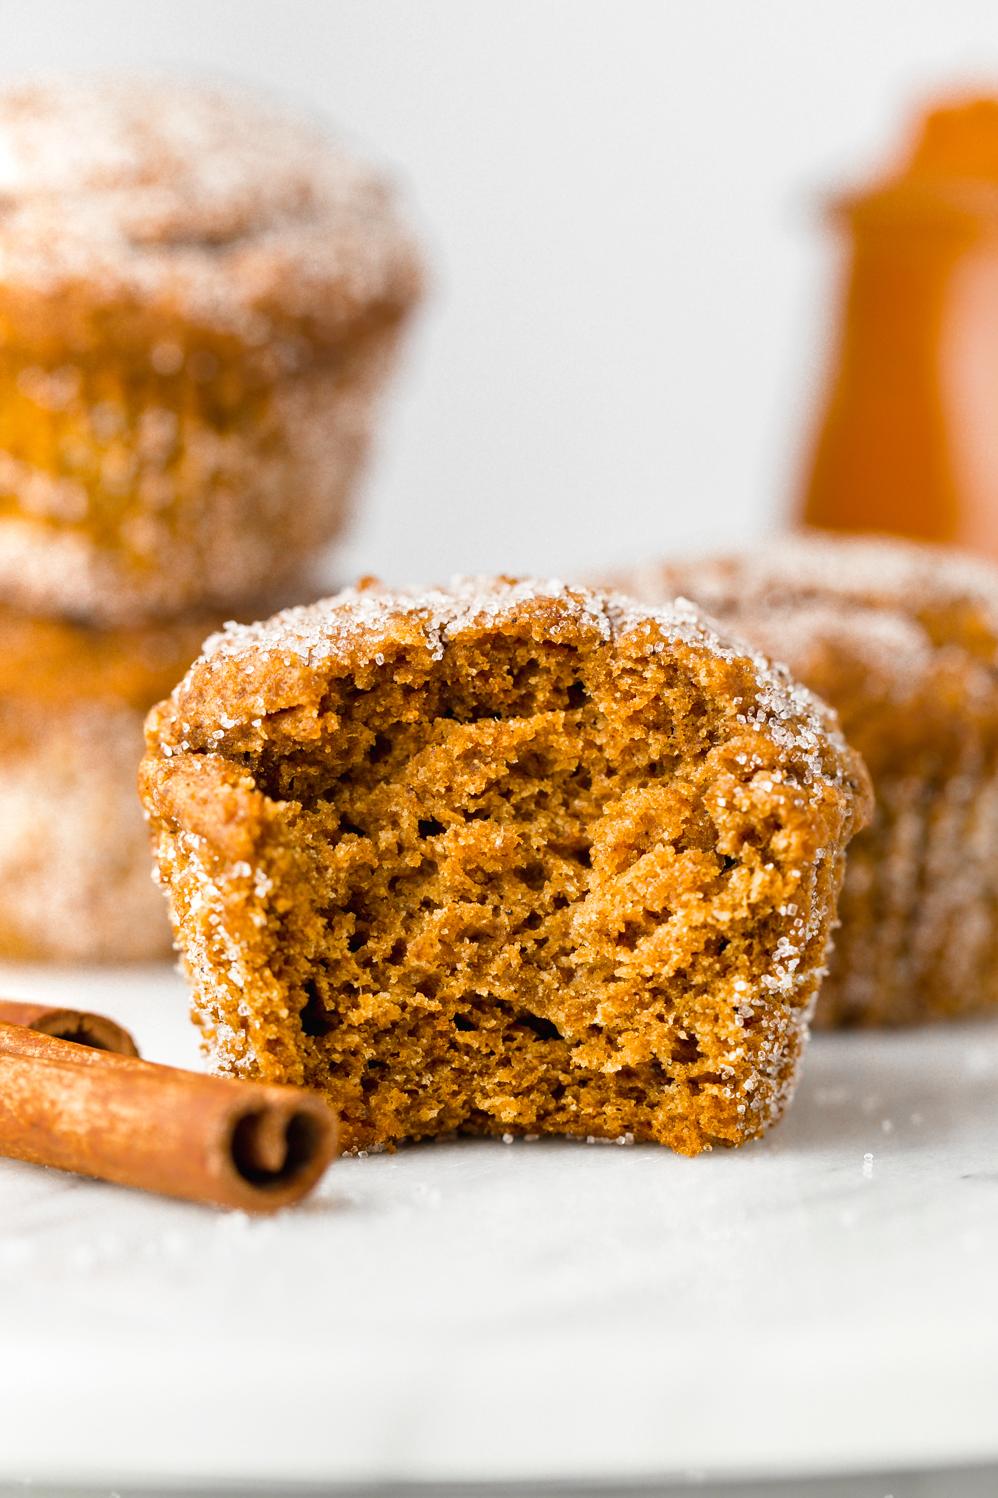  Easy and quick to make, these pumpkin muffins are perfect for meal prep